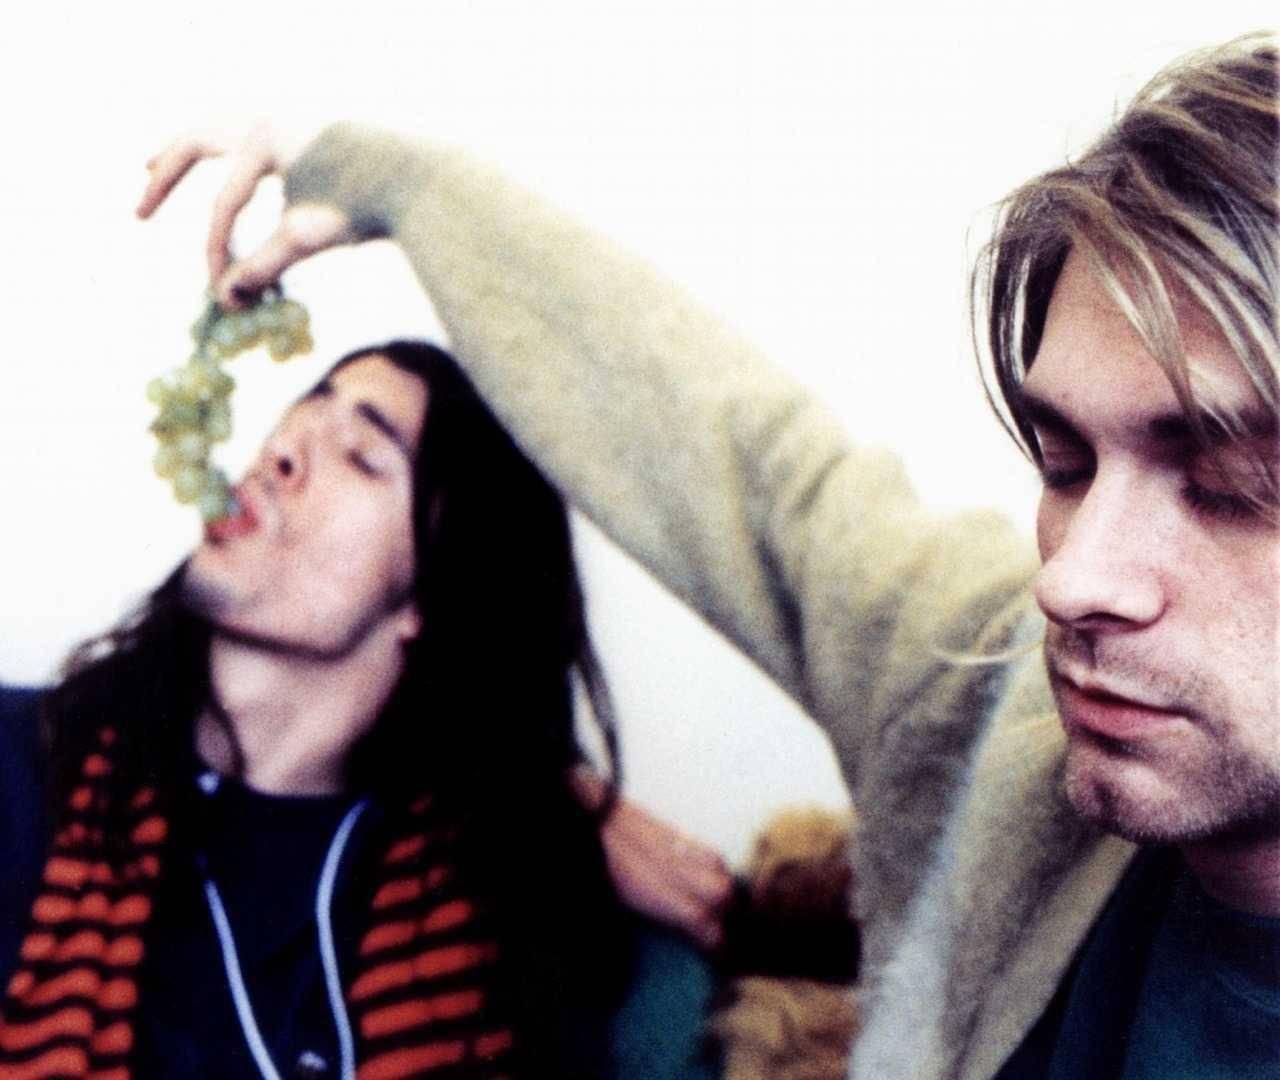 Kurt Cobain feeding Dave Grohl grapes in 1991.